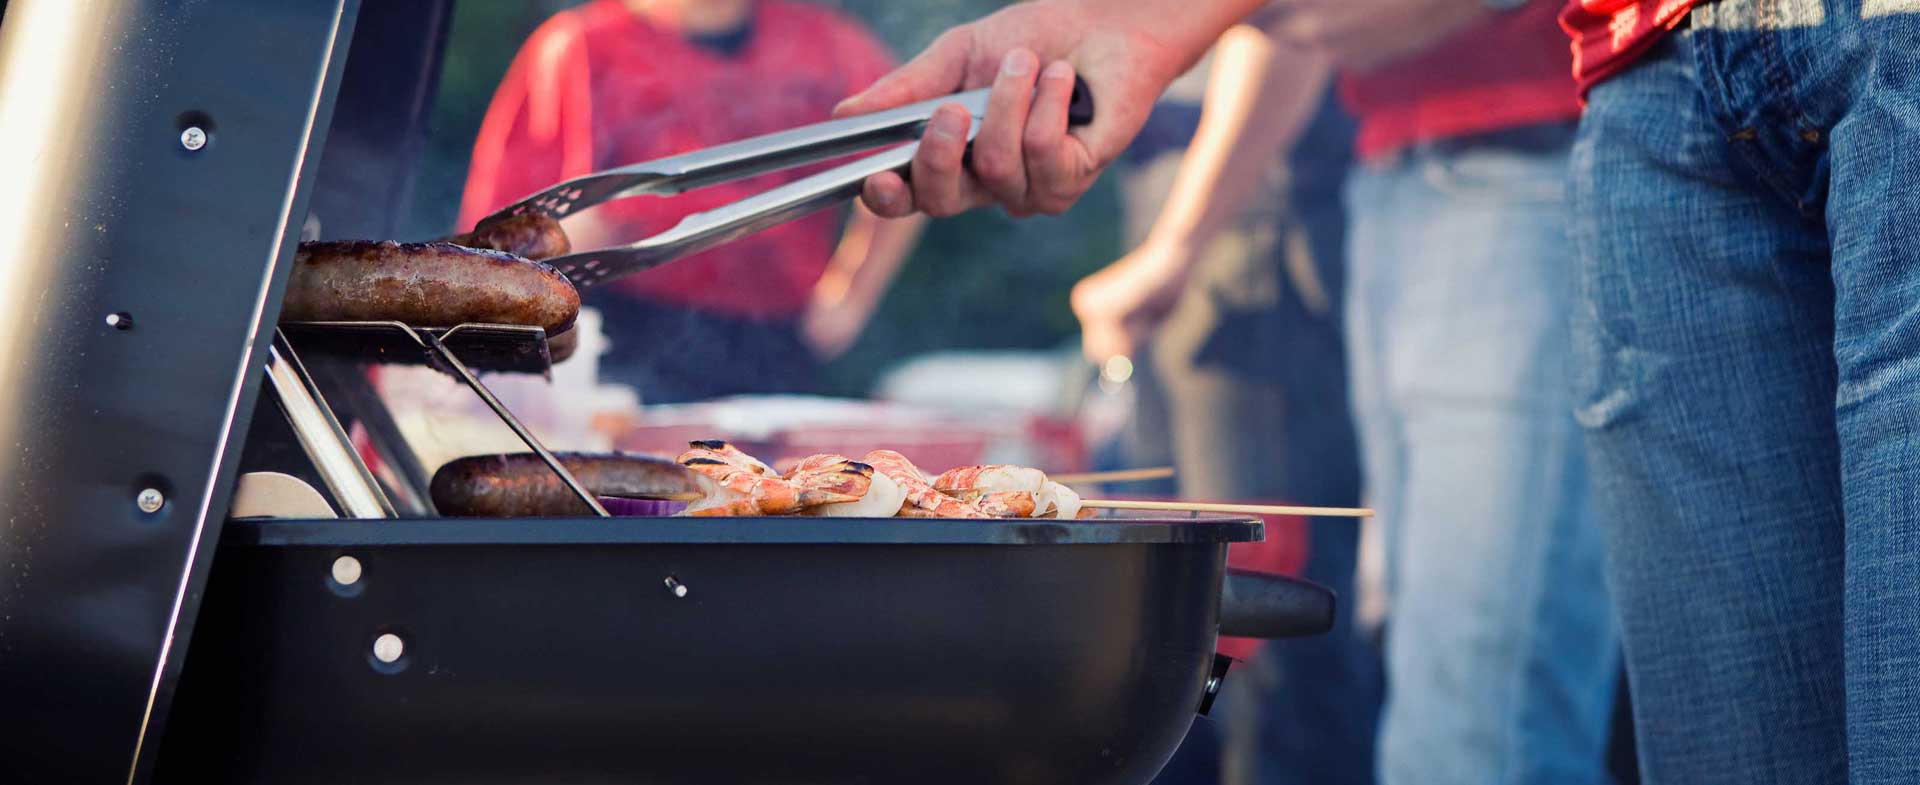 grilling safety tips 1140x570